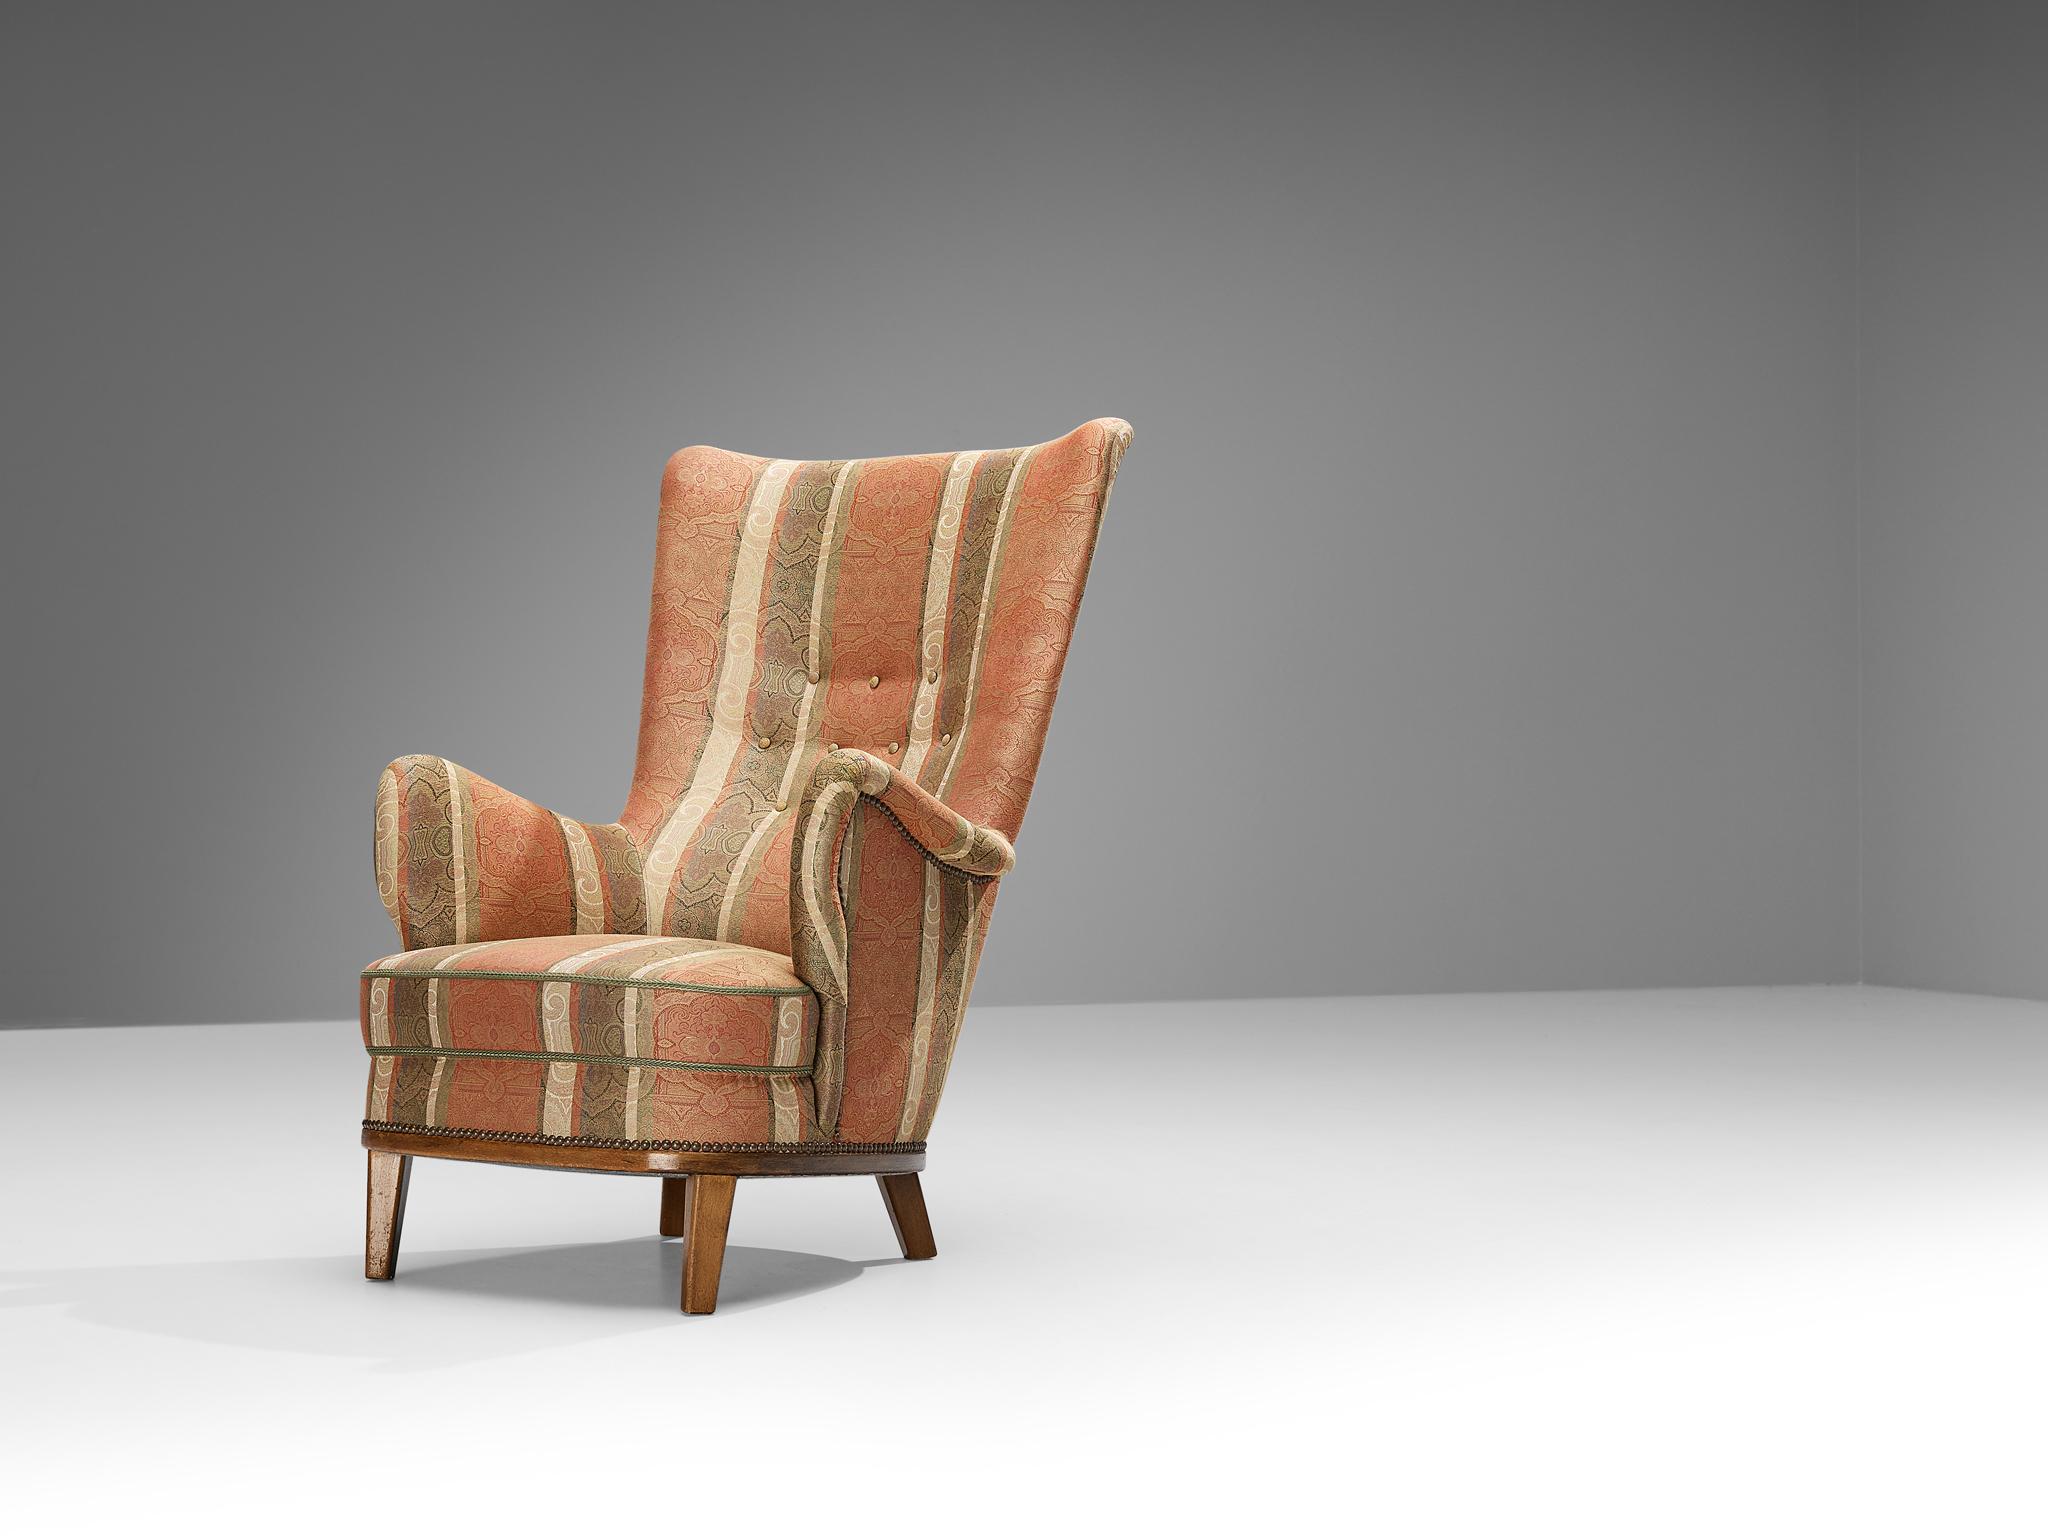 Lounge chair, fabric, brass, beech, Denmark, 1950s

This wingback armchair of the 1950s is both visually appealing and exceptionally comfortable. Its striped fabric features a blend of pink-orange, brown, and beige strokes, accentuated by green